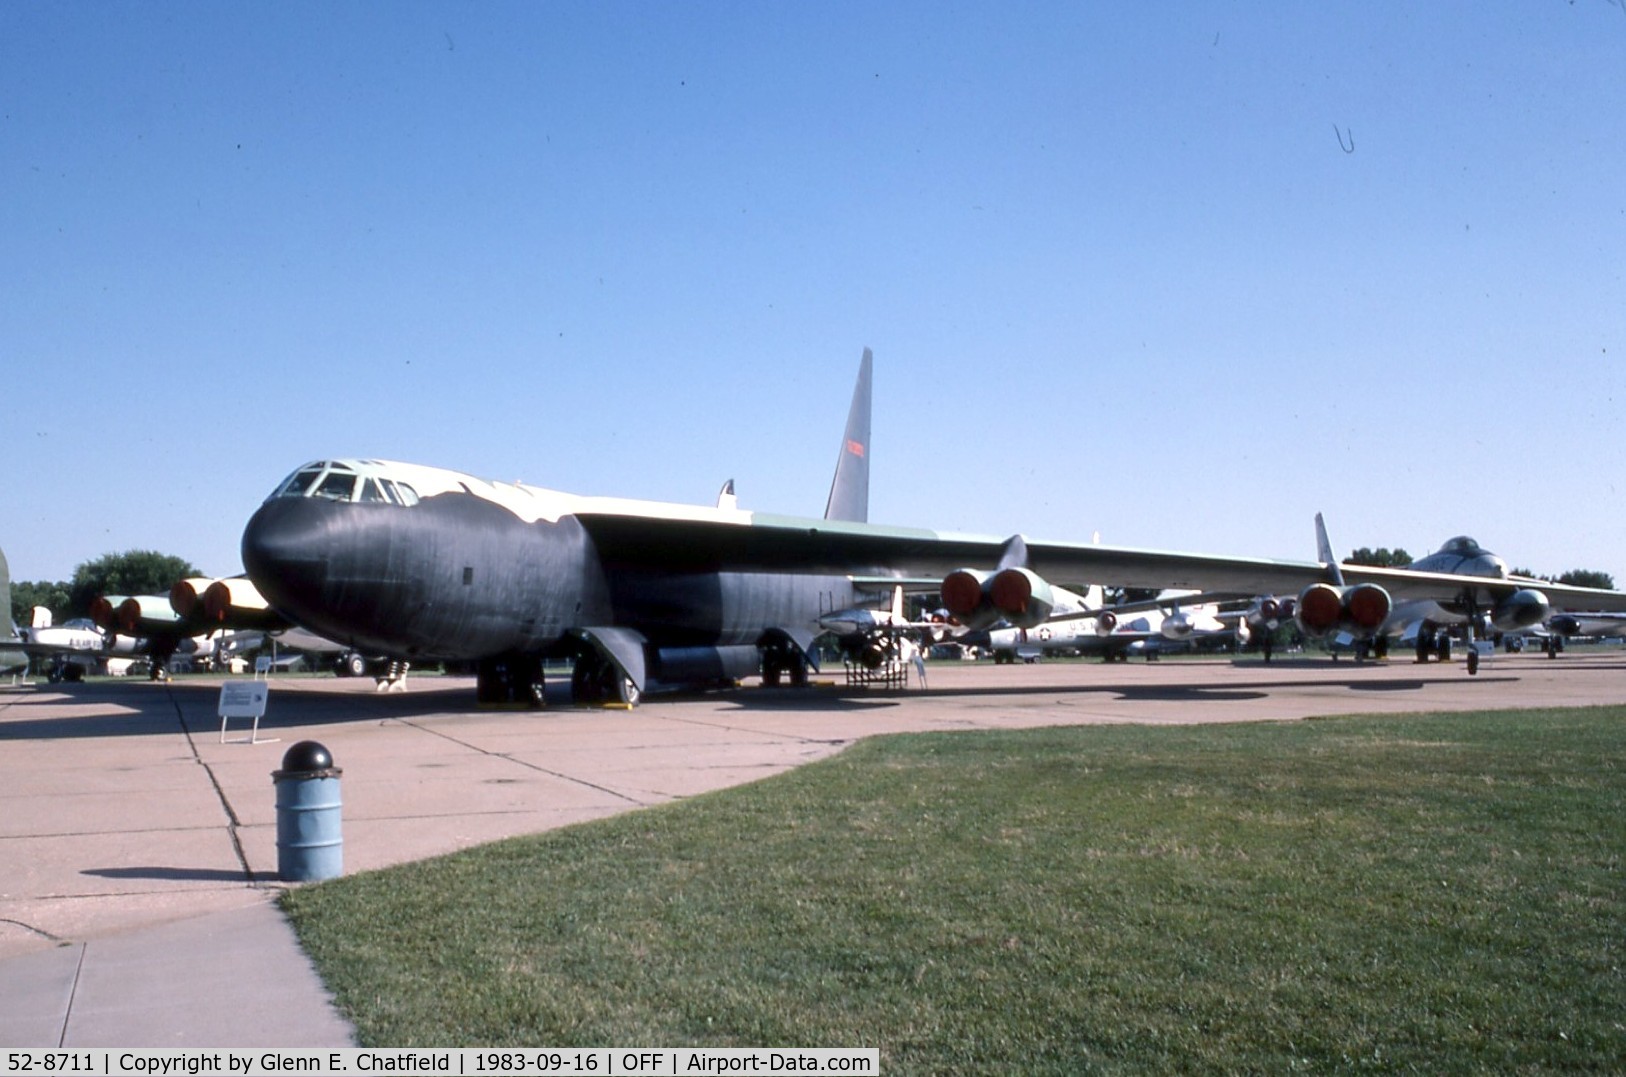 52-8711, 1952 Boeing RB-52B-15-BO Stratofortress C/N 16839, RB-52B at the old Strategic Air Command Museum